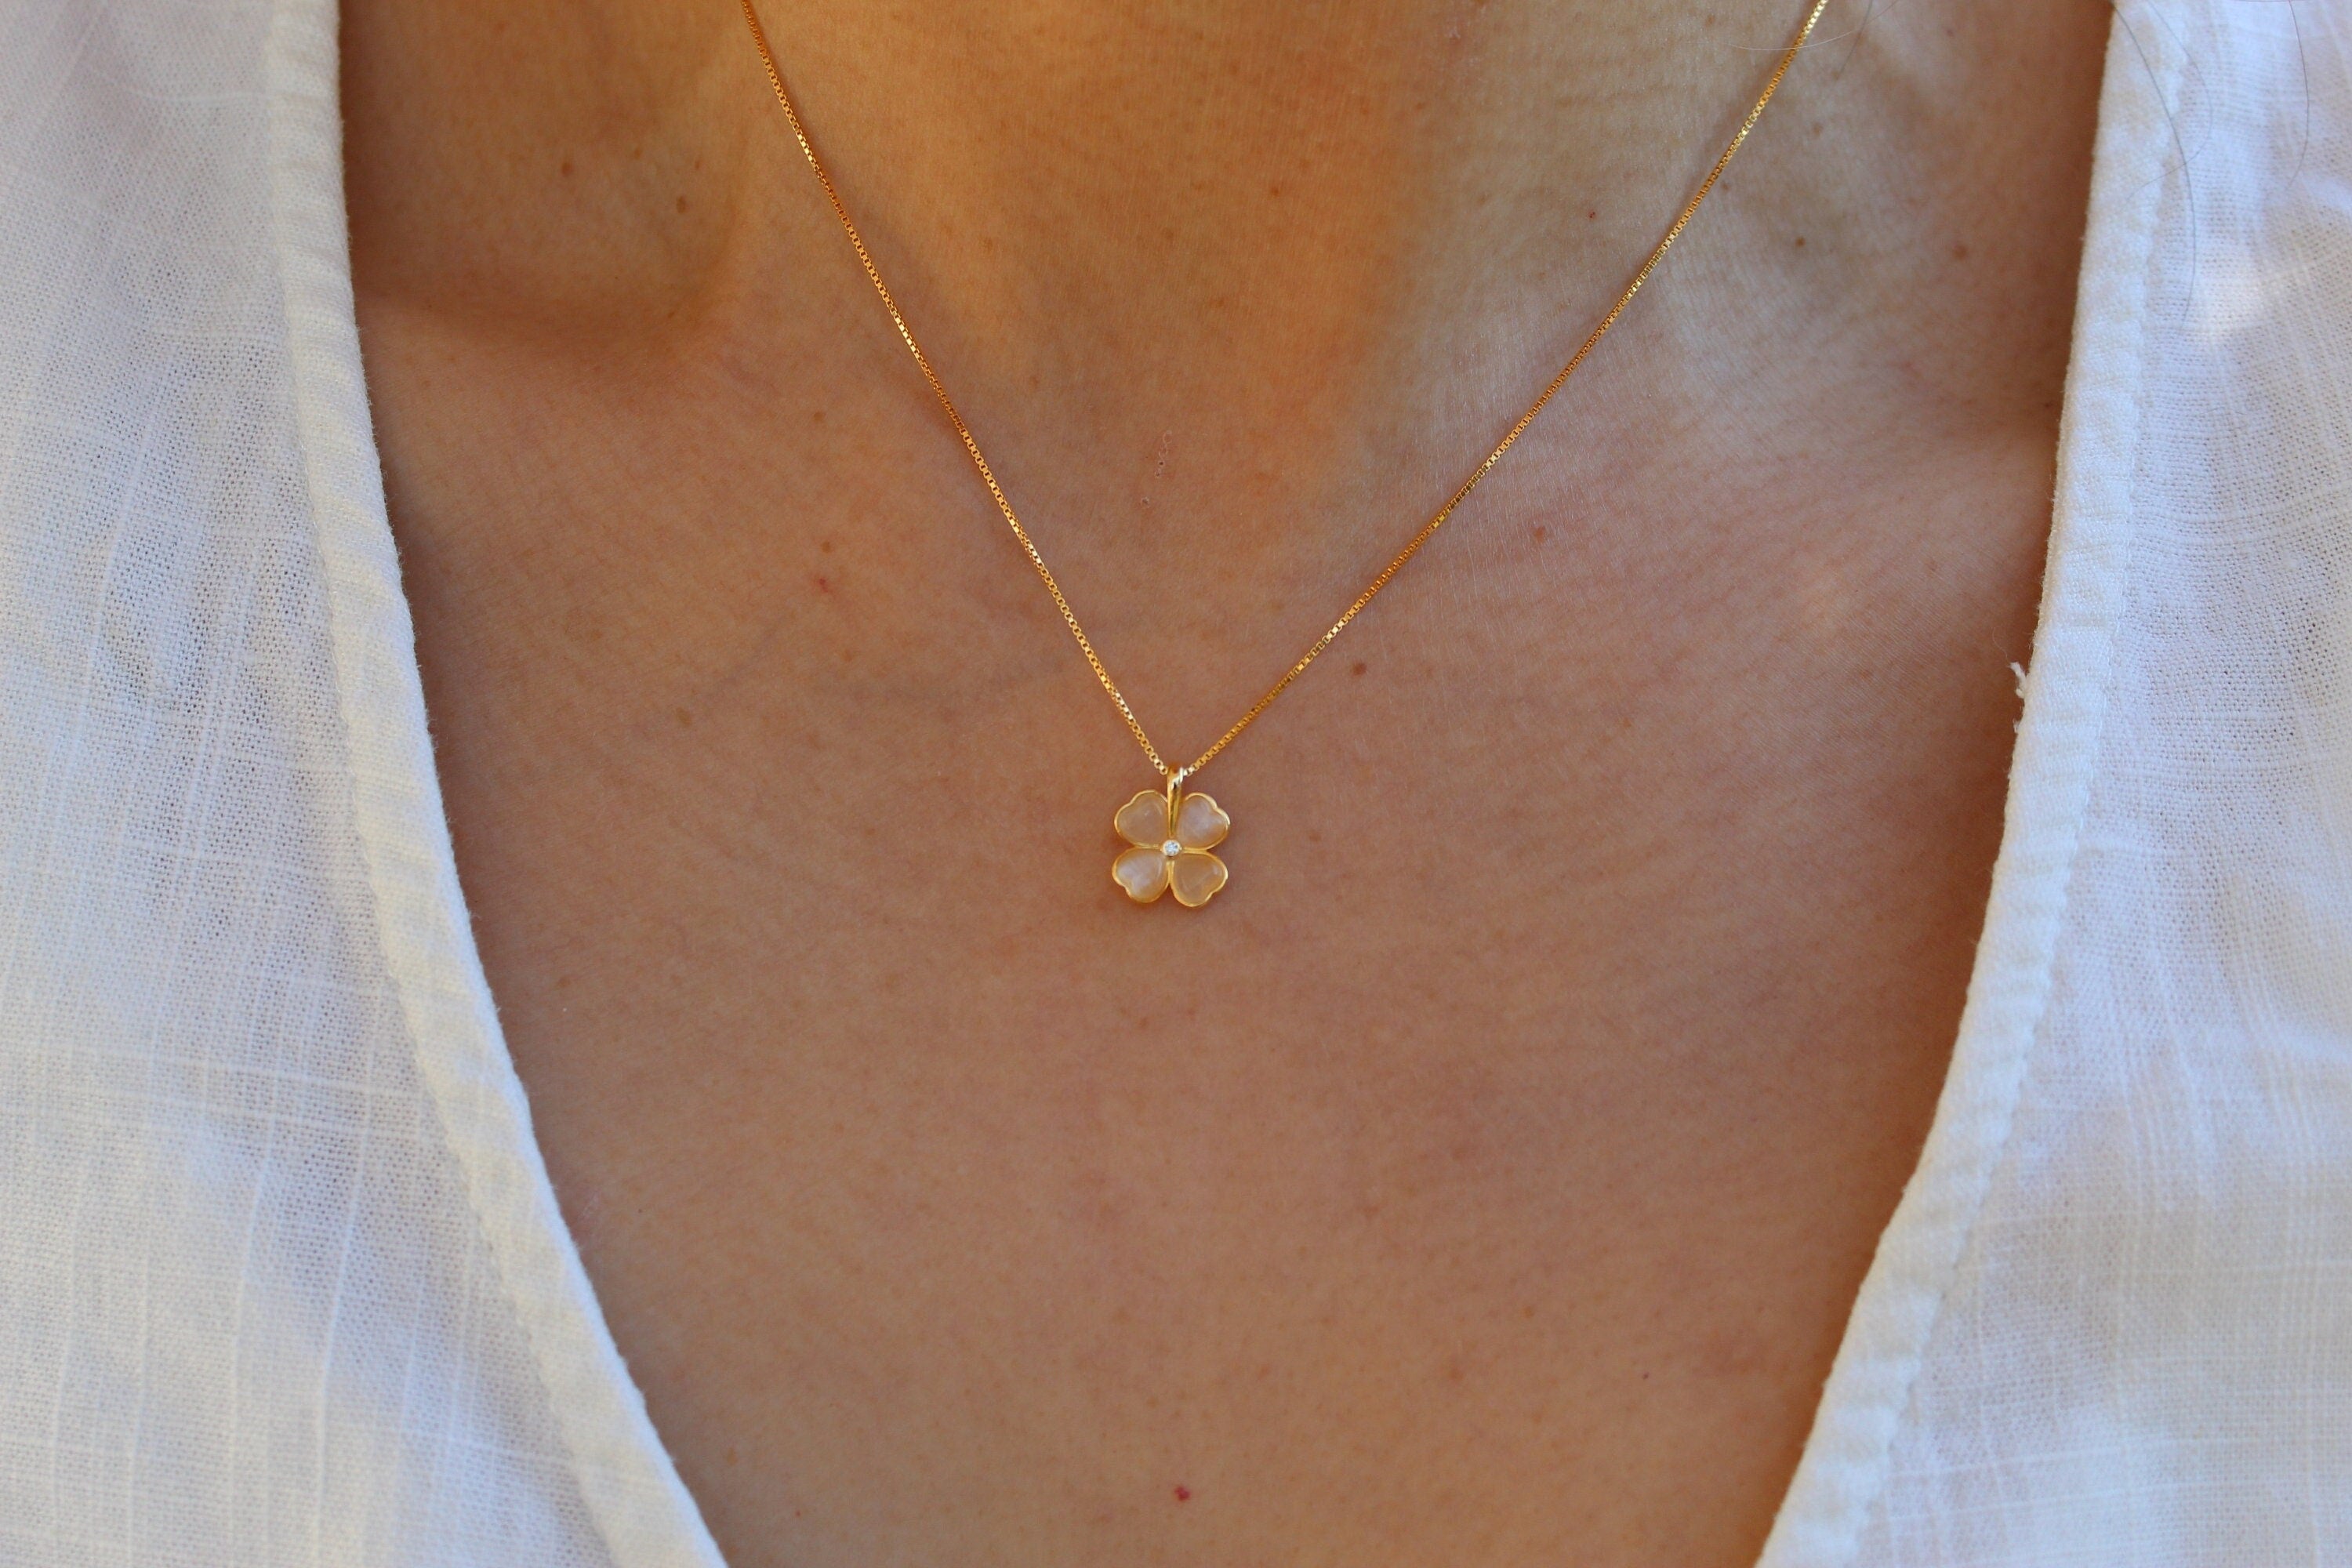 Dainty 14k Gold Flower Necklace for Everyday Jewelry